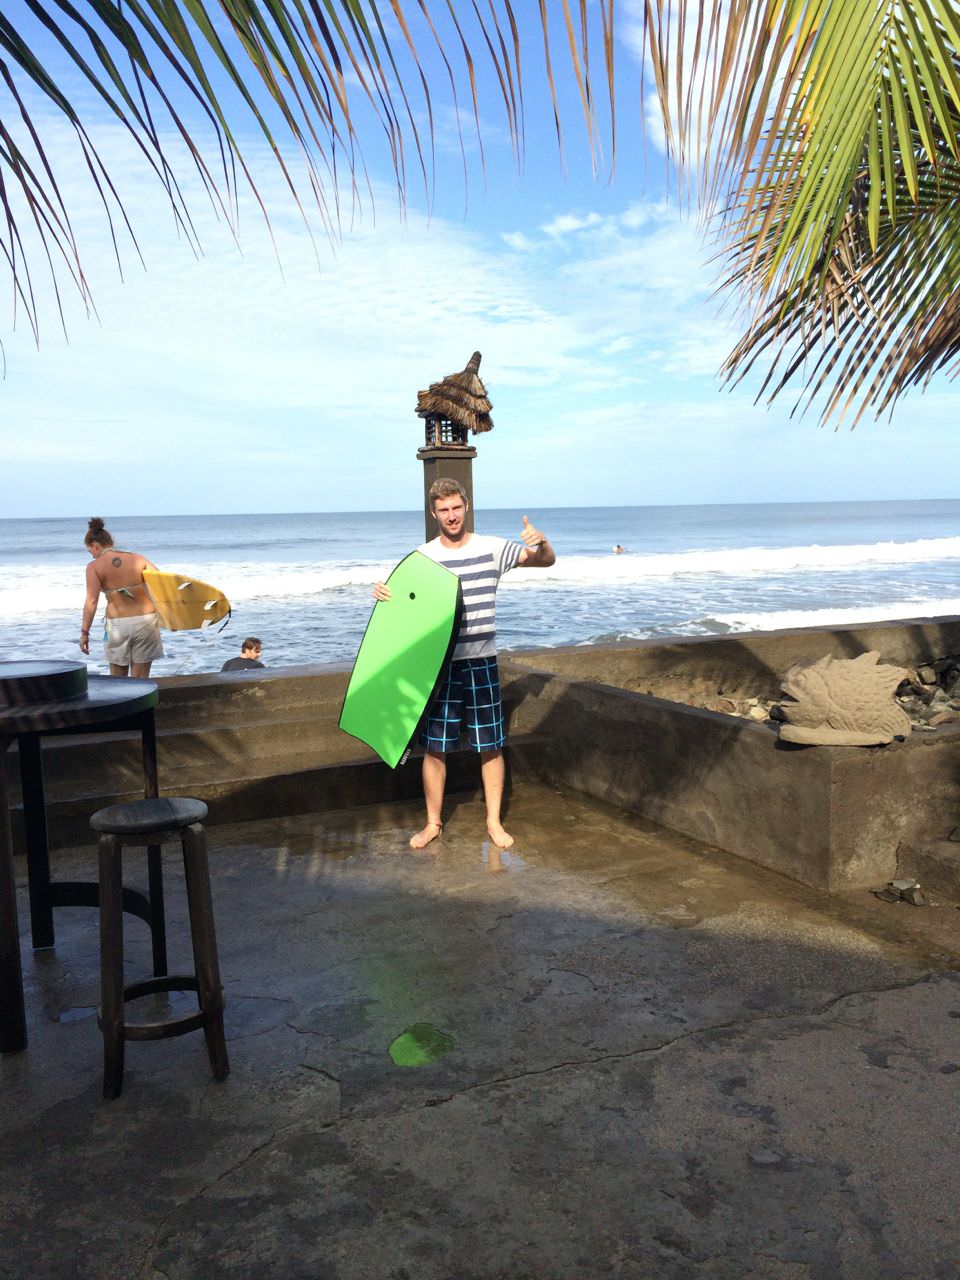 Surfing in Nicaragua